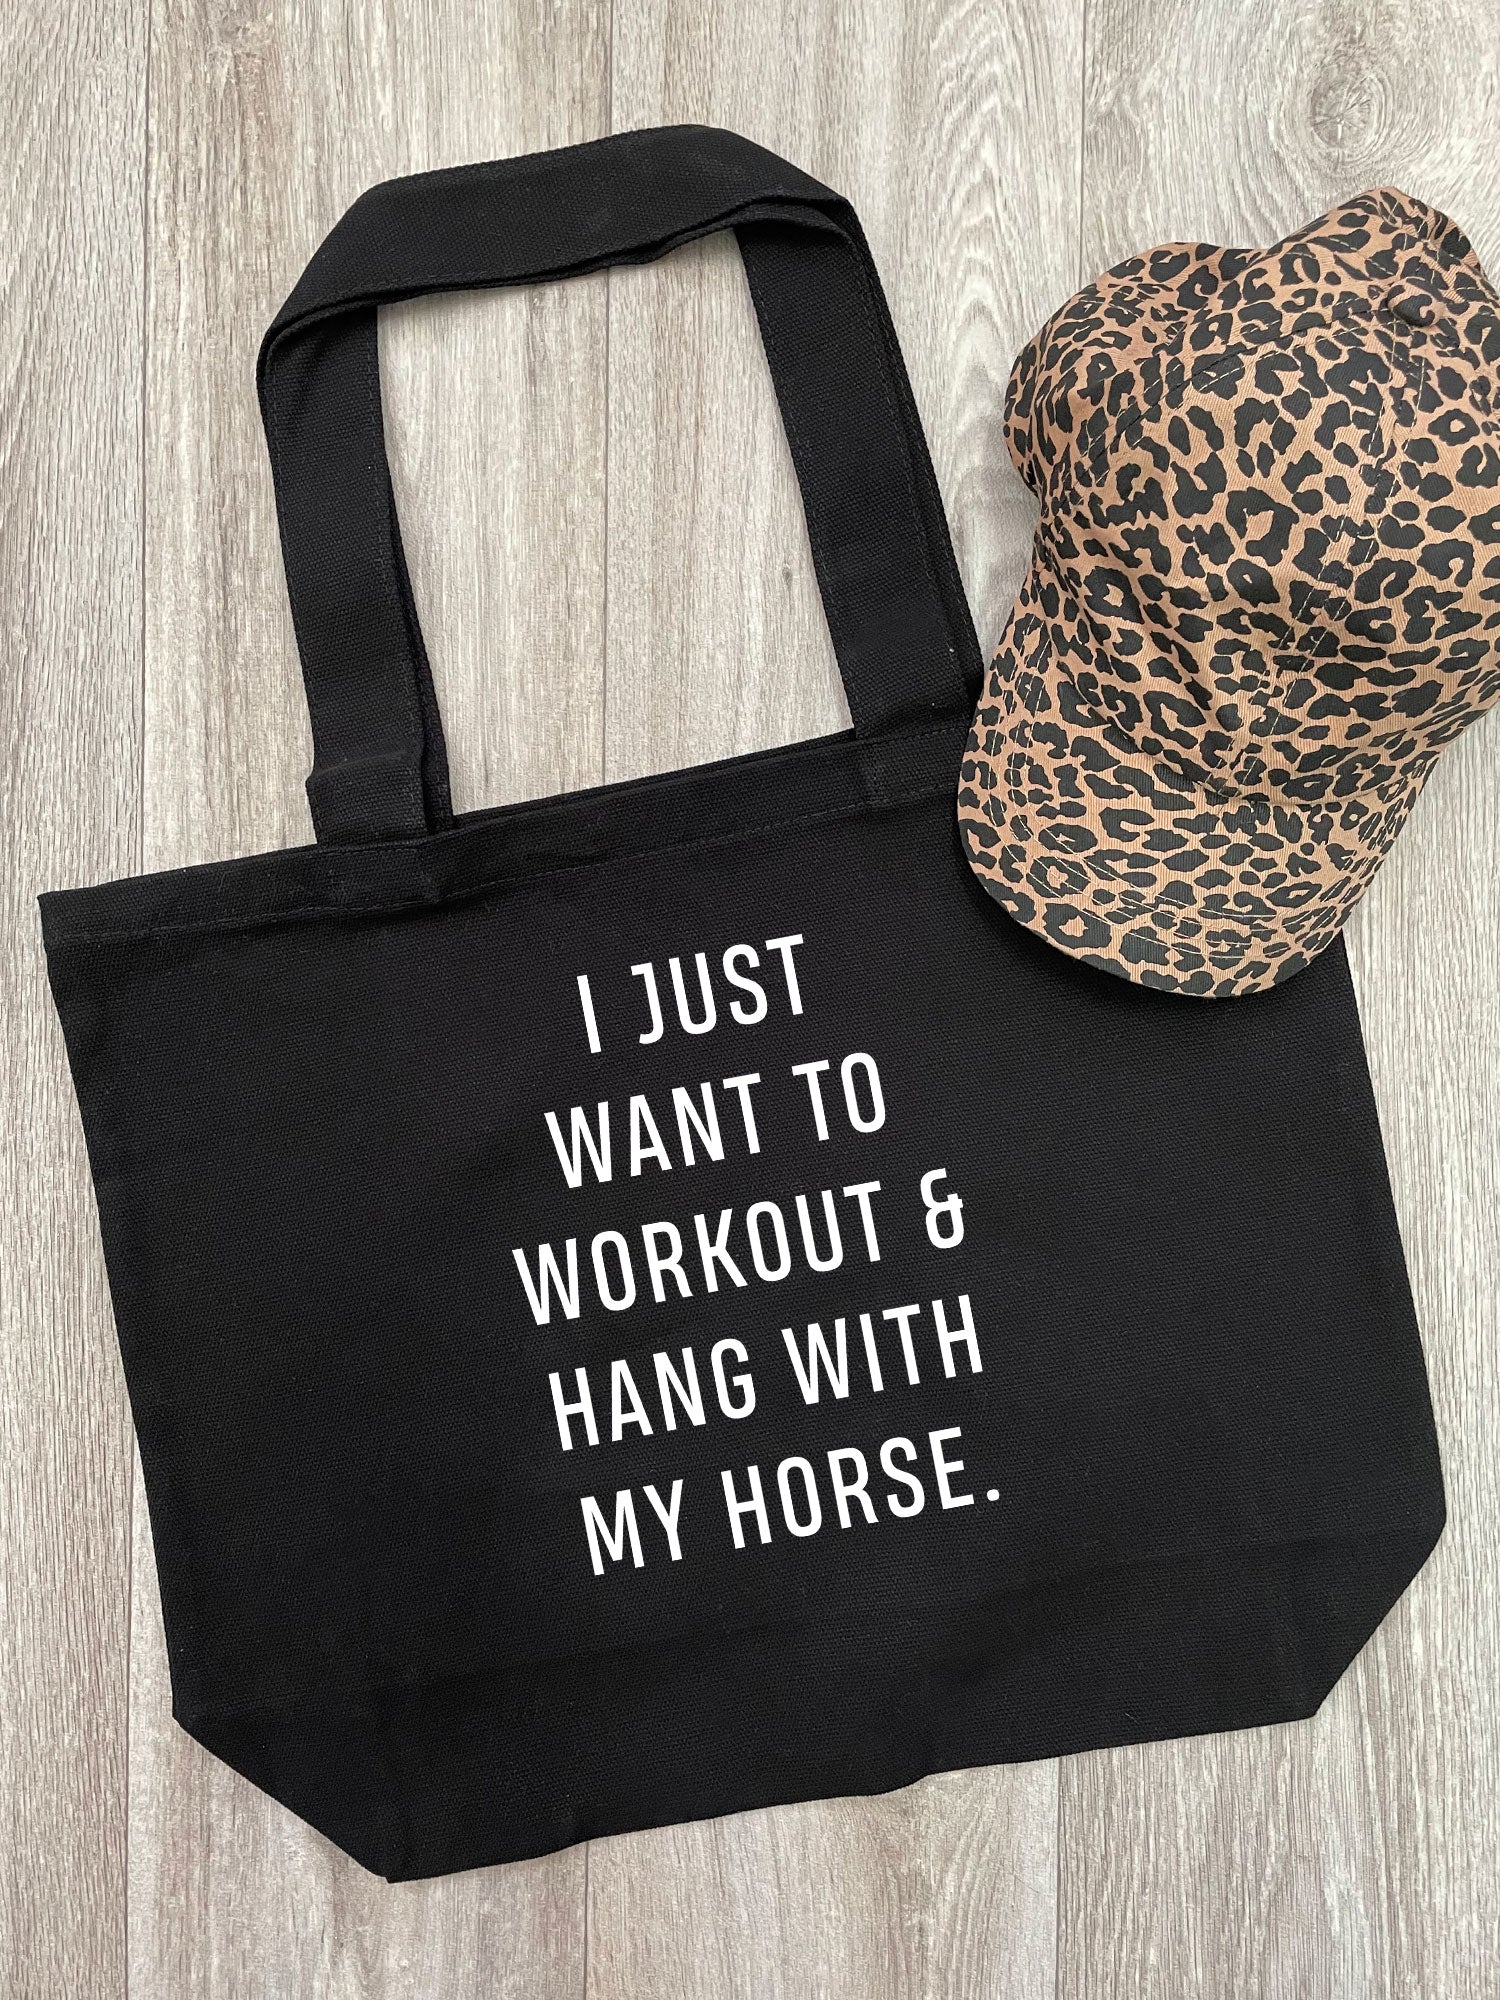 Workout & Hang With My Horse Cotton Canvas Shoulder Tote Bag